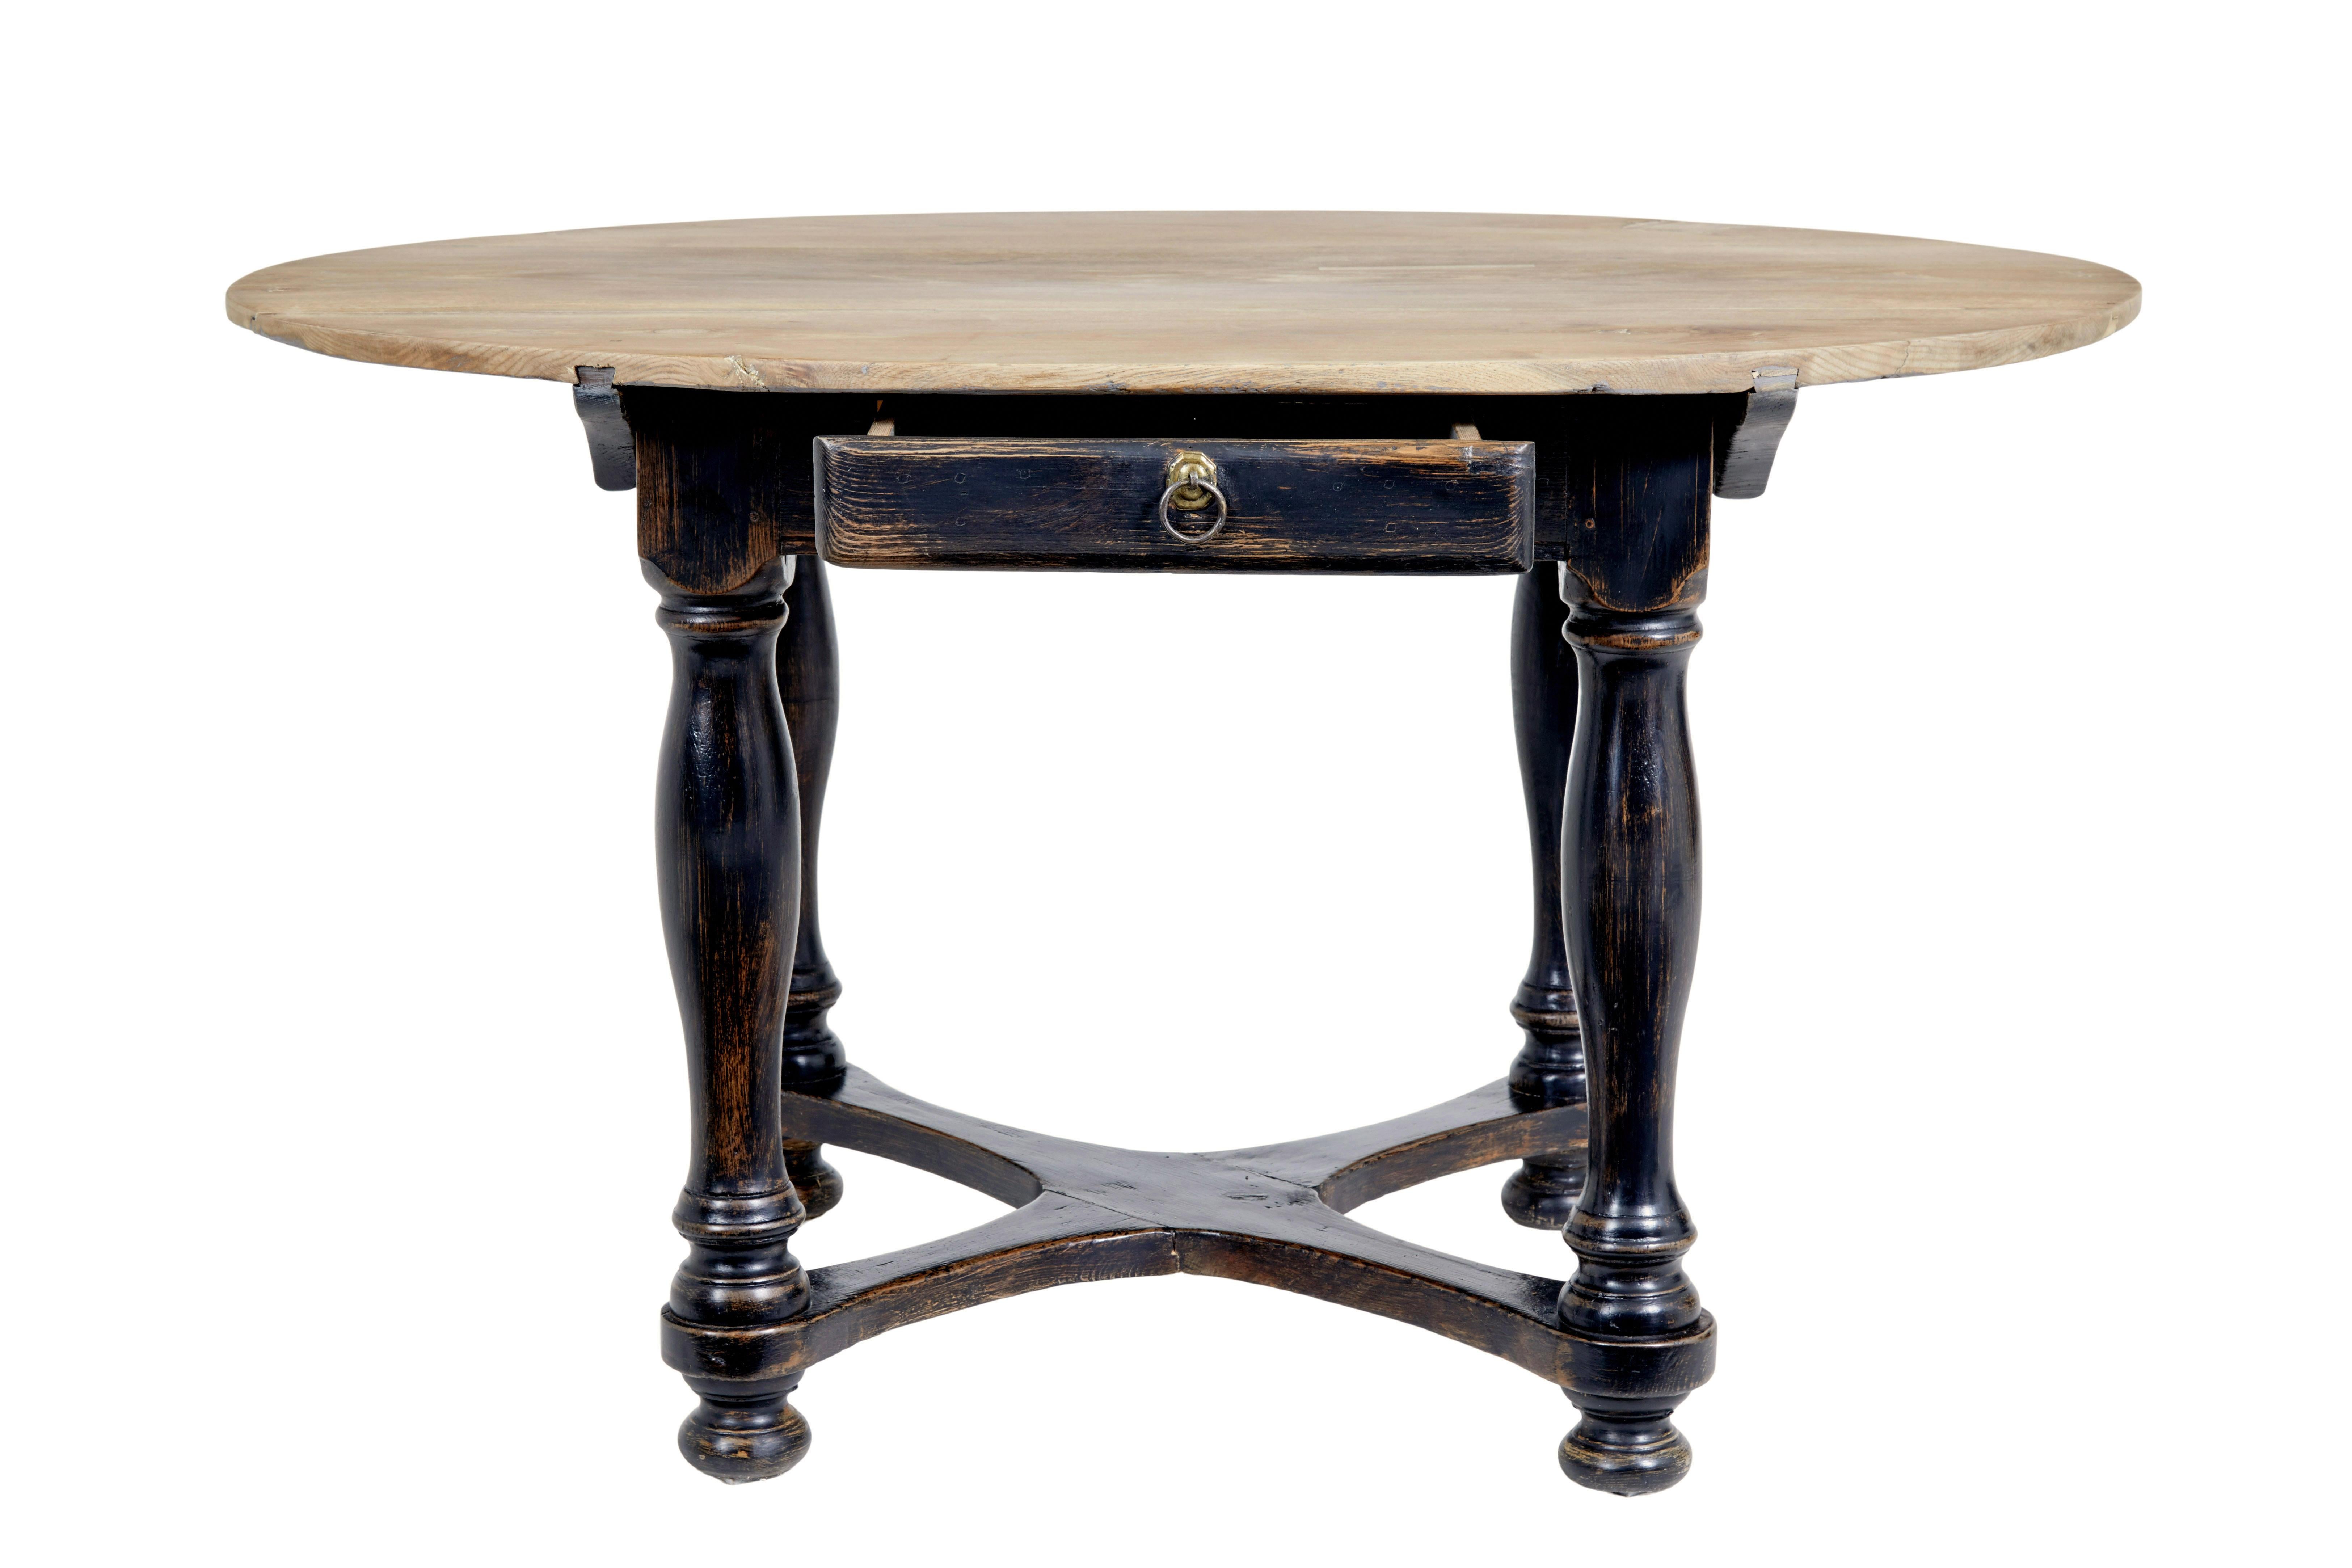 Mid 19th century painted oak occasional table circa 1860.

Good quality table with multiple uses around the home.  Could function equally well as a kitchen dining table, center table or sofa table.

Oval shaped solid oak top with obvious historic